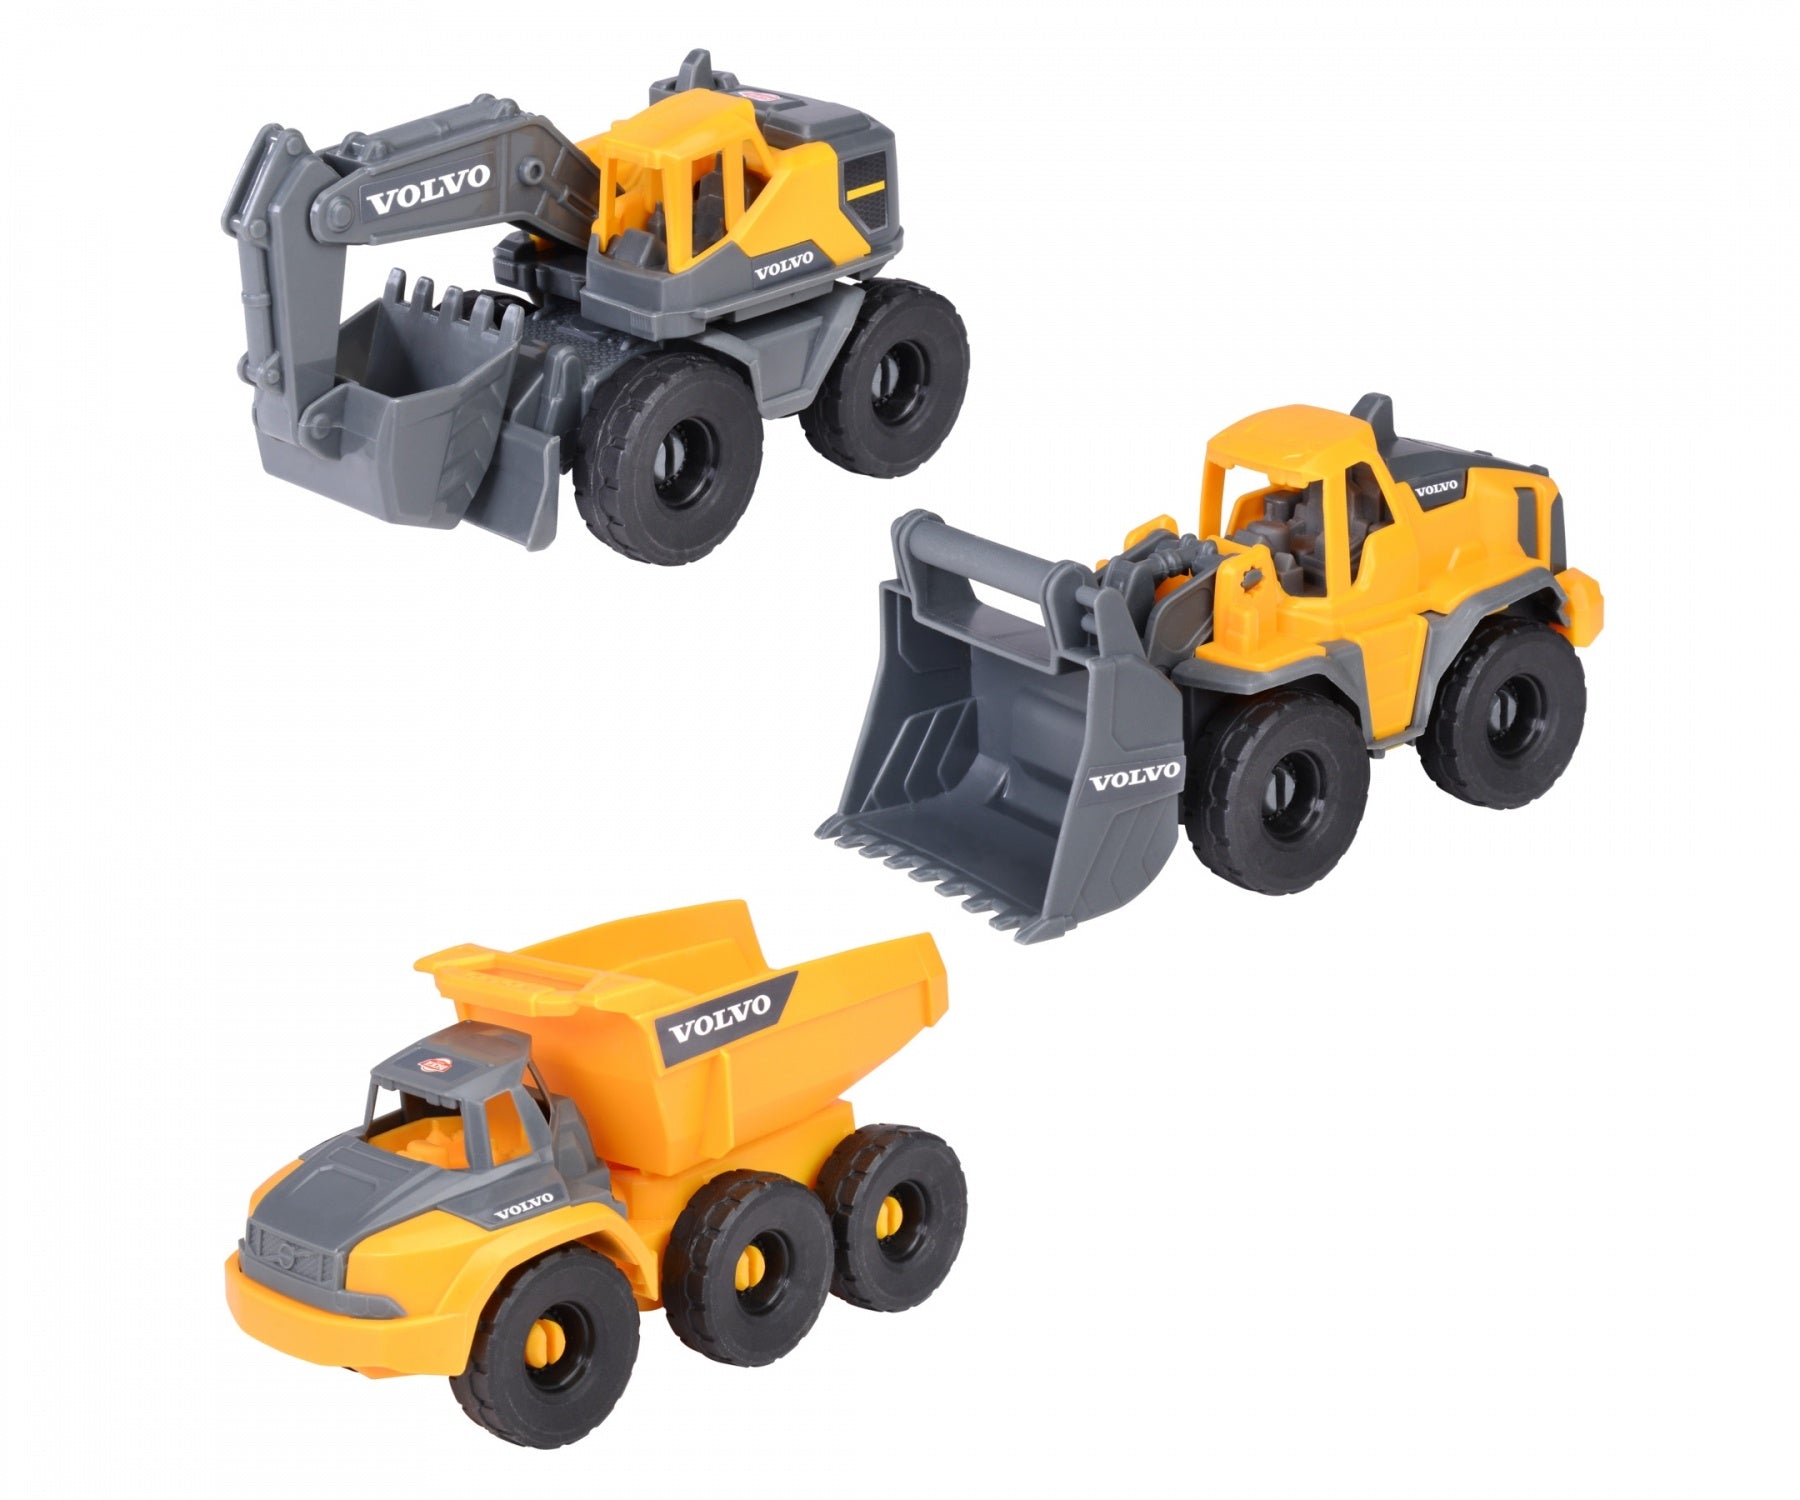 Dickie Volvo 3pc Construction Vehicle Play Set